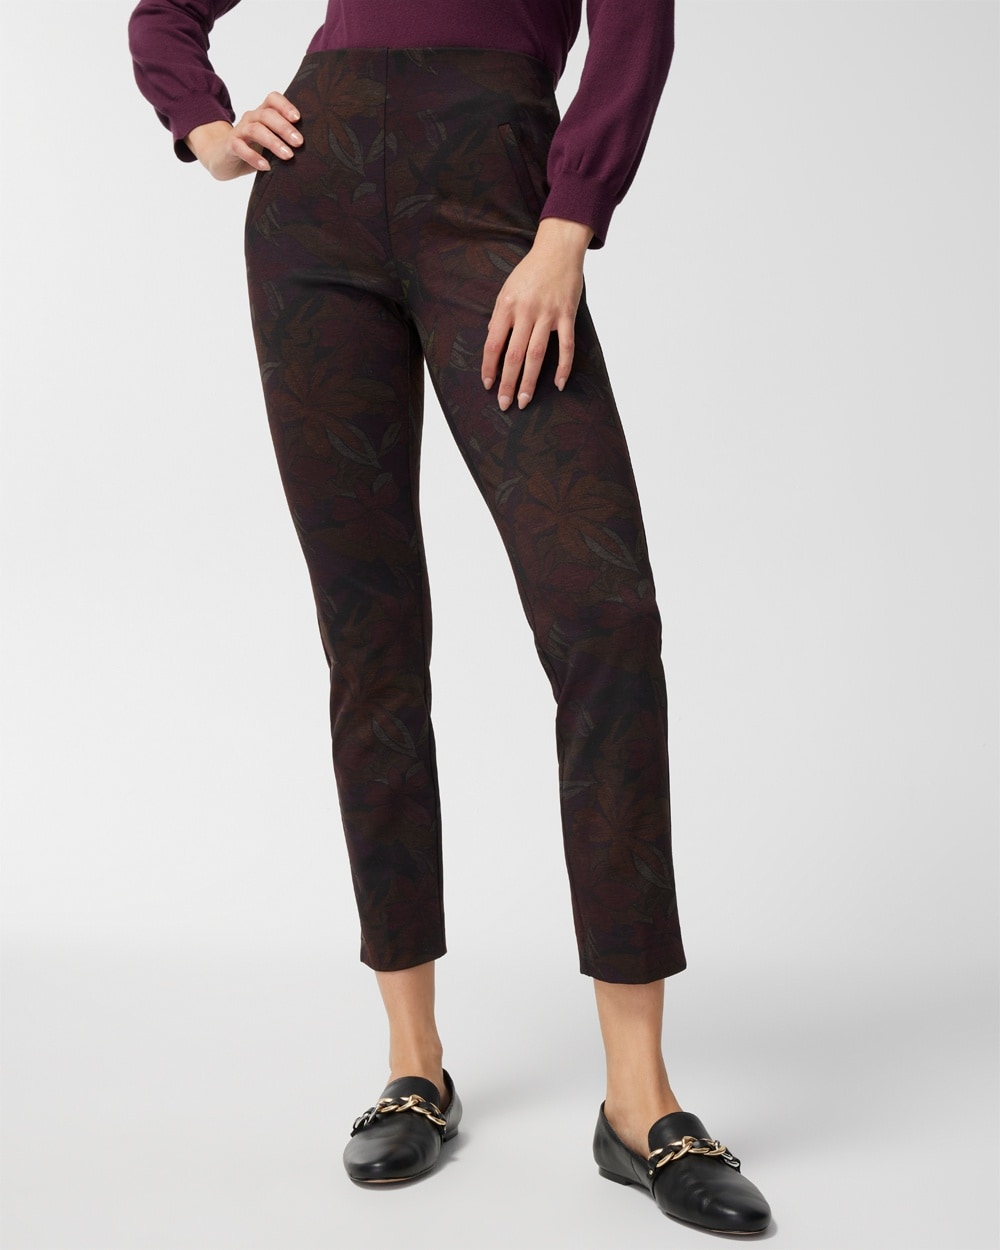 Pacific Floral Ponte Pull-On Slim Ankle Pants